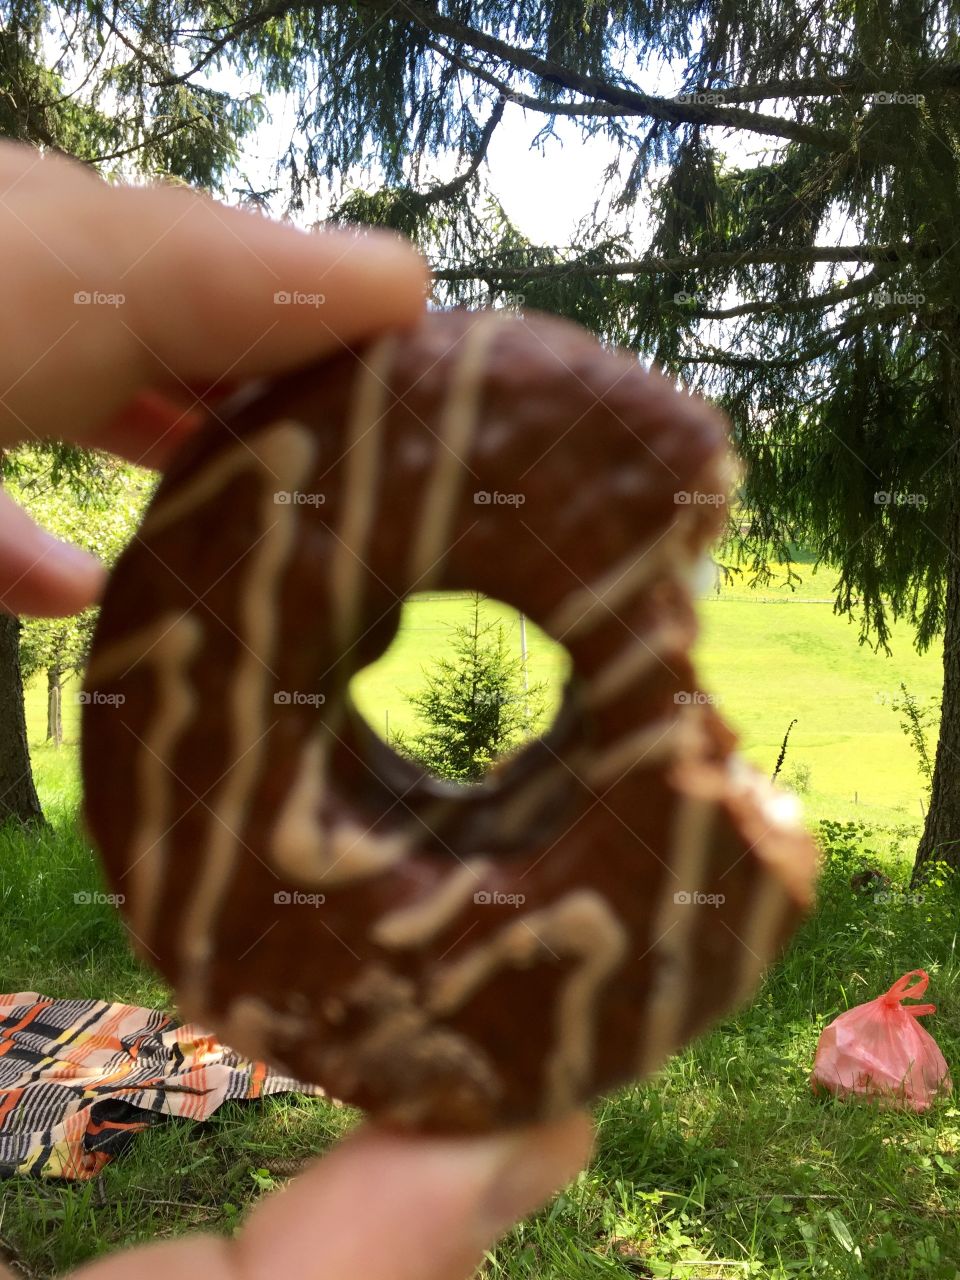 Donut view